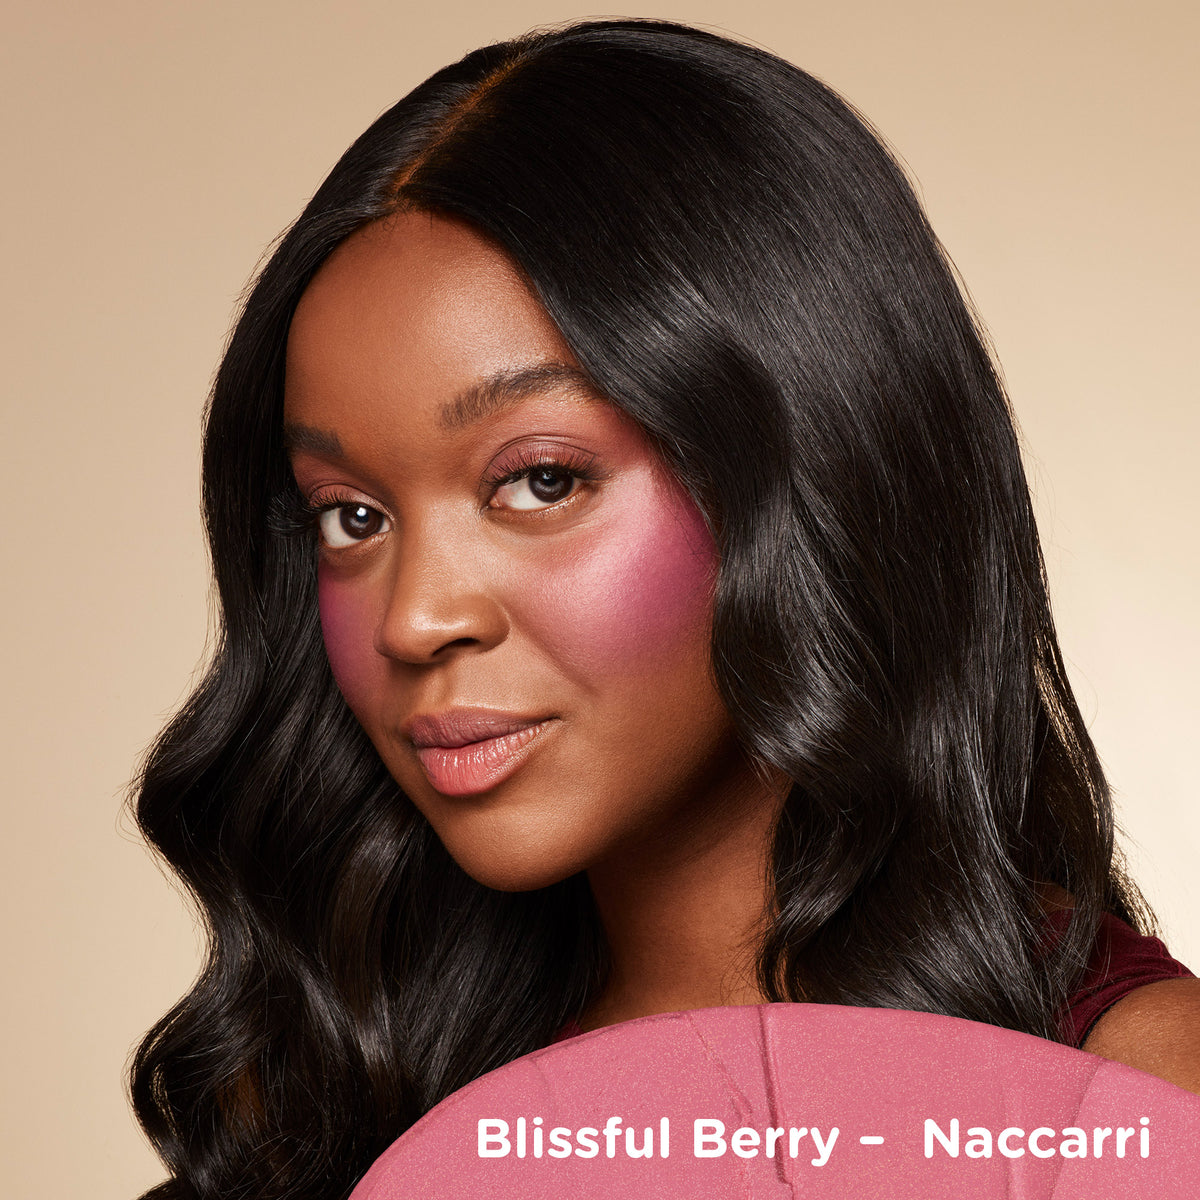 Blissful Berry.